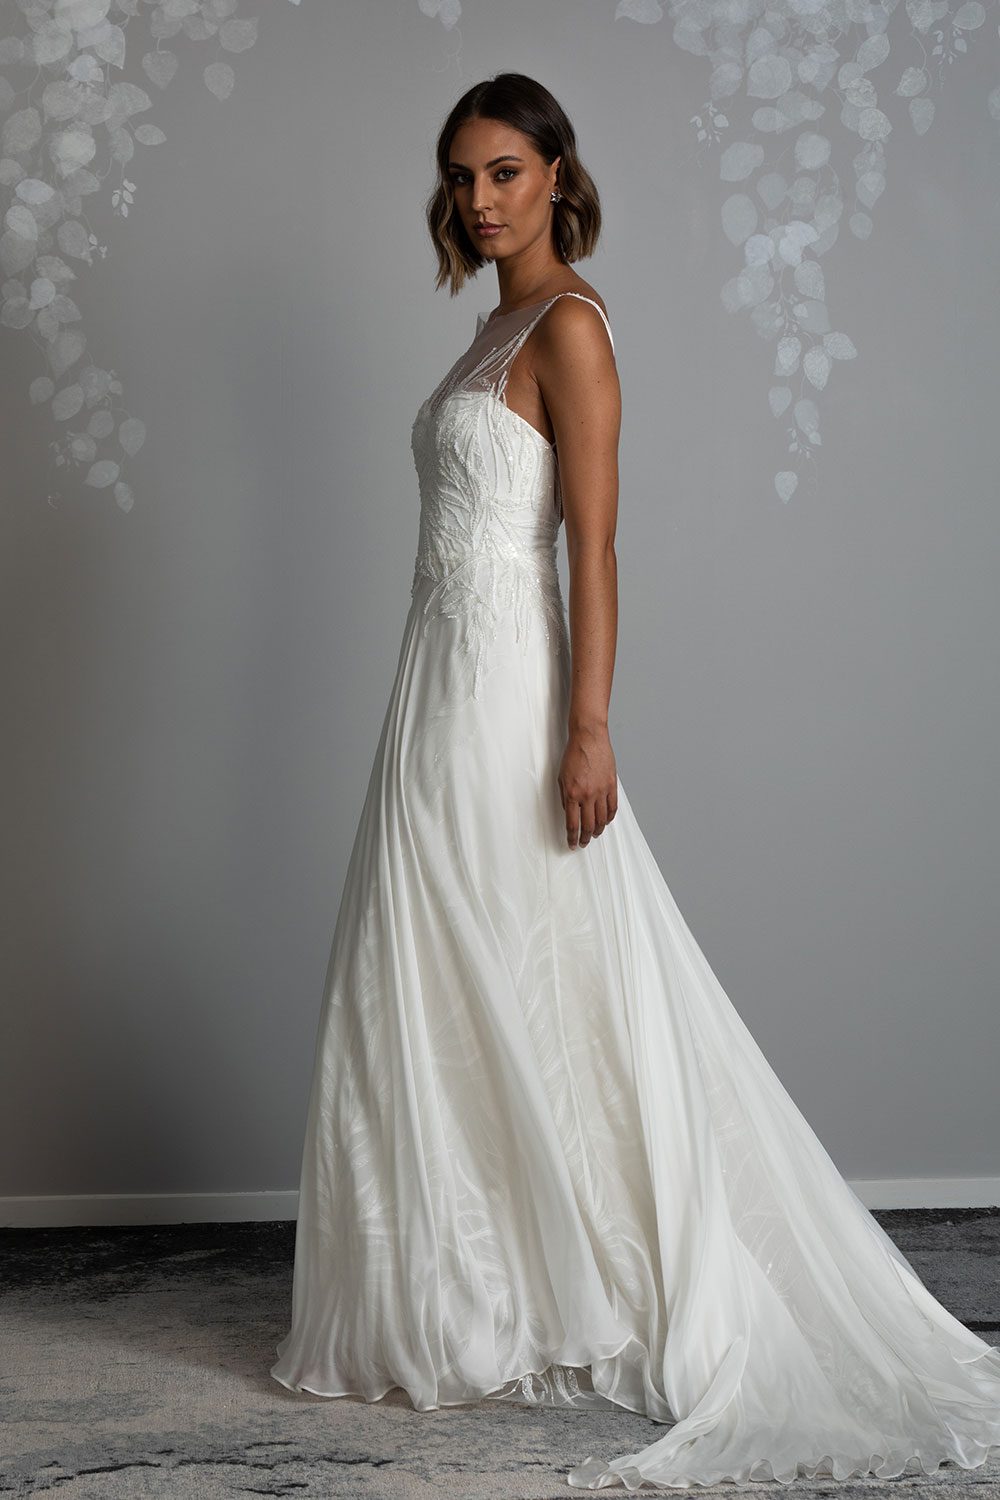 Gio Wedding Dress from Vinka design. Intricate gown with high sheer neckline and a fitted, structured bodice, as well as a double-strapped low back. The lace is hand-appliqued throughout the bodice and flatters the smallness of the waist, providing a stunning silhouette. Model in profile view showing long silk chiffon train that moves beautifully